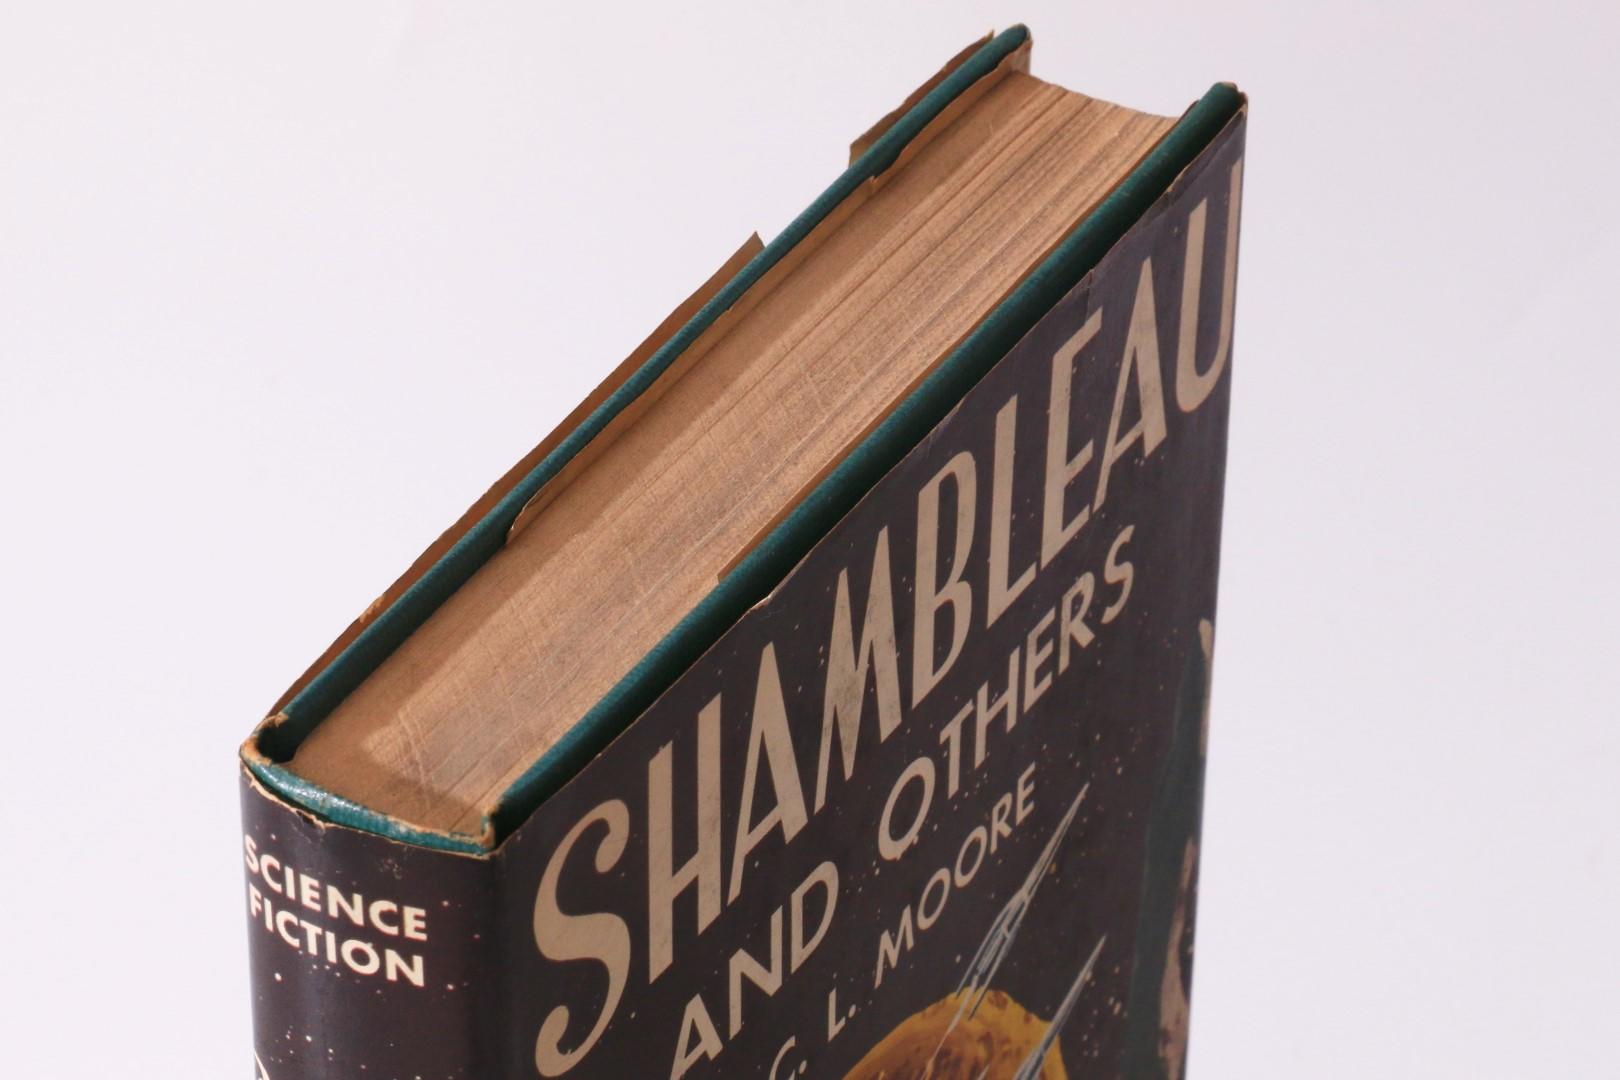 C.L. Moore - Shambleau and Others - Gnome Press, 1953, First Edition.